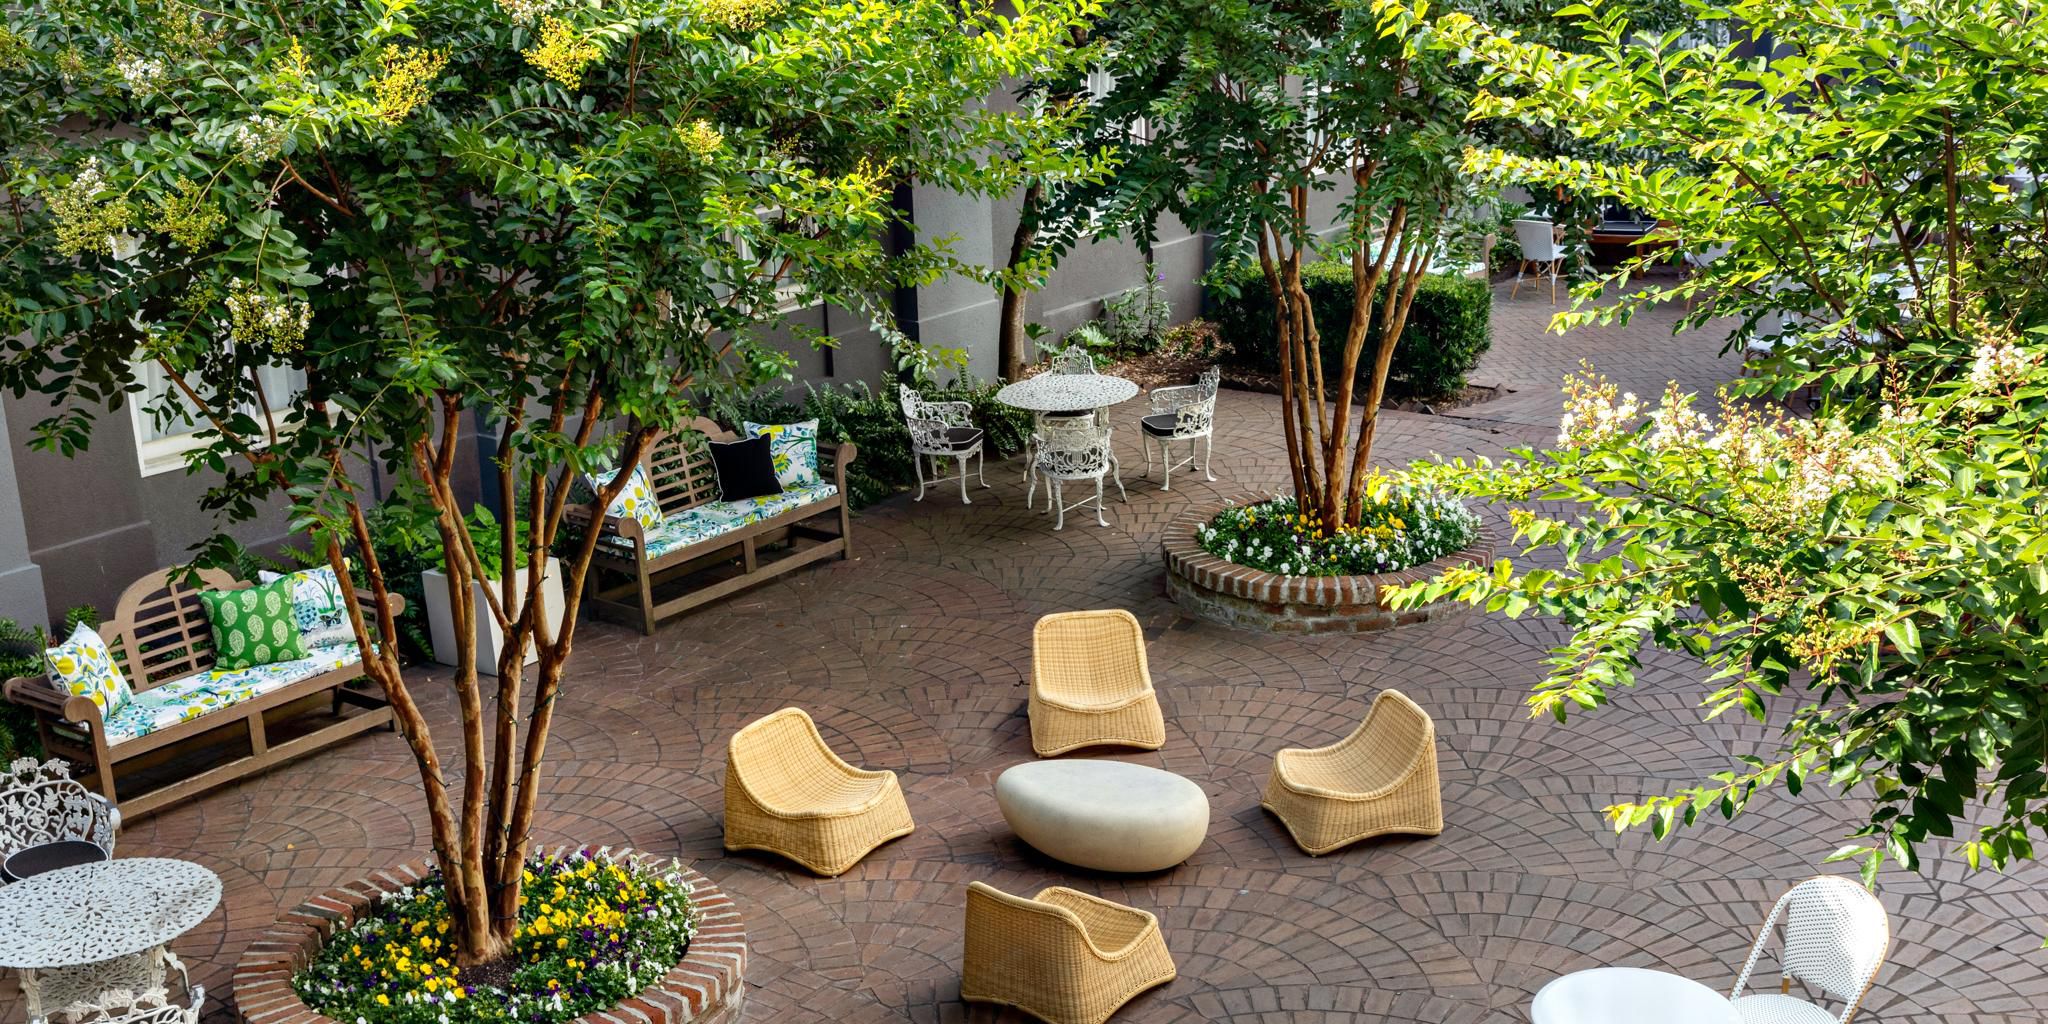 Enjoy the sweet ways of Savannah. Guests of The Brice can enjoy our Secret Garden outdoor area at leisure. On cooler days, Social Hour is served outdoors. It's a perfect spot to kick back and chill, day or night, under those sweet Savannah skies. 